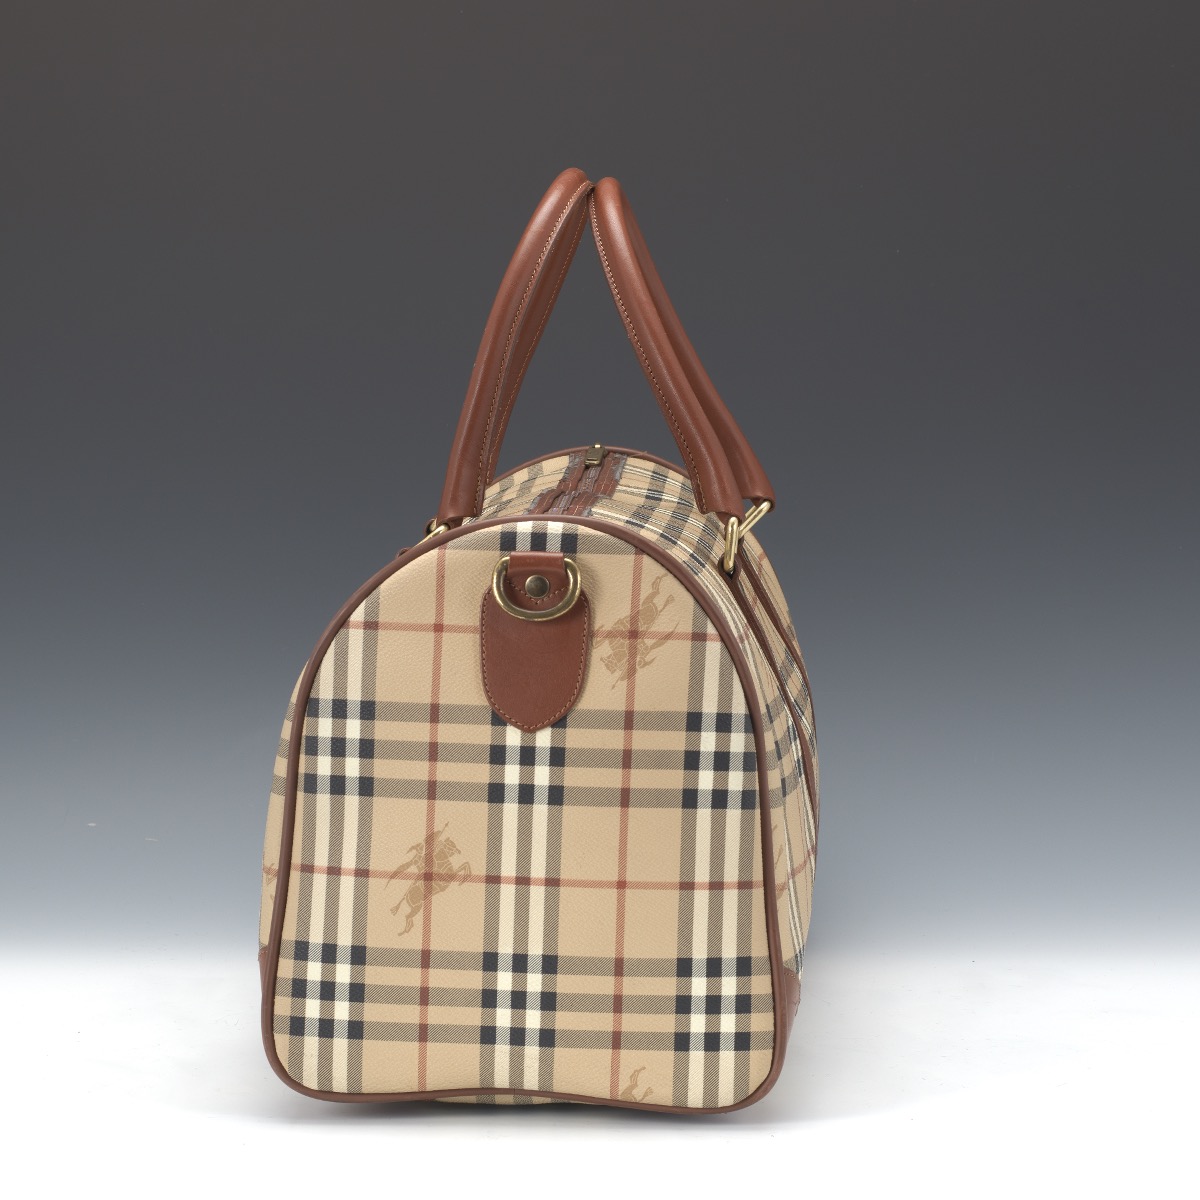 Burberry Coated Canvas Haymarket Check Carry On Travel Bag - Image 5 of 9